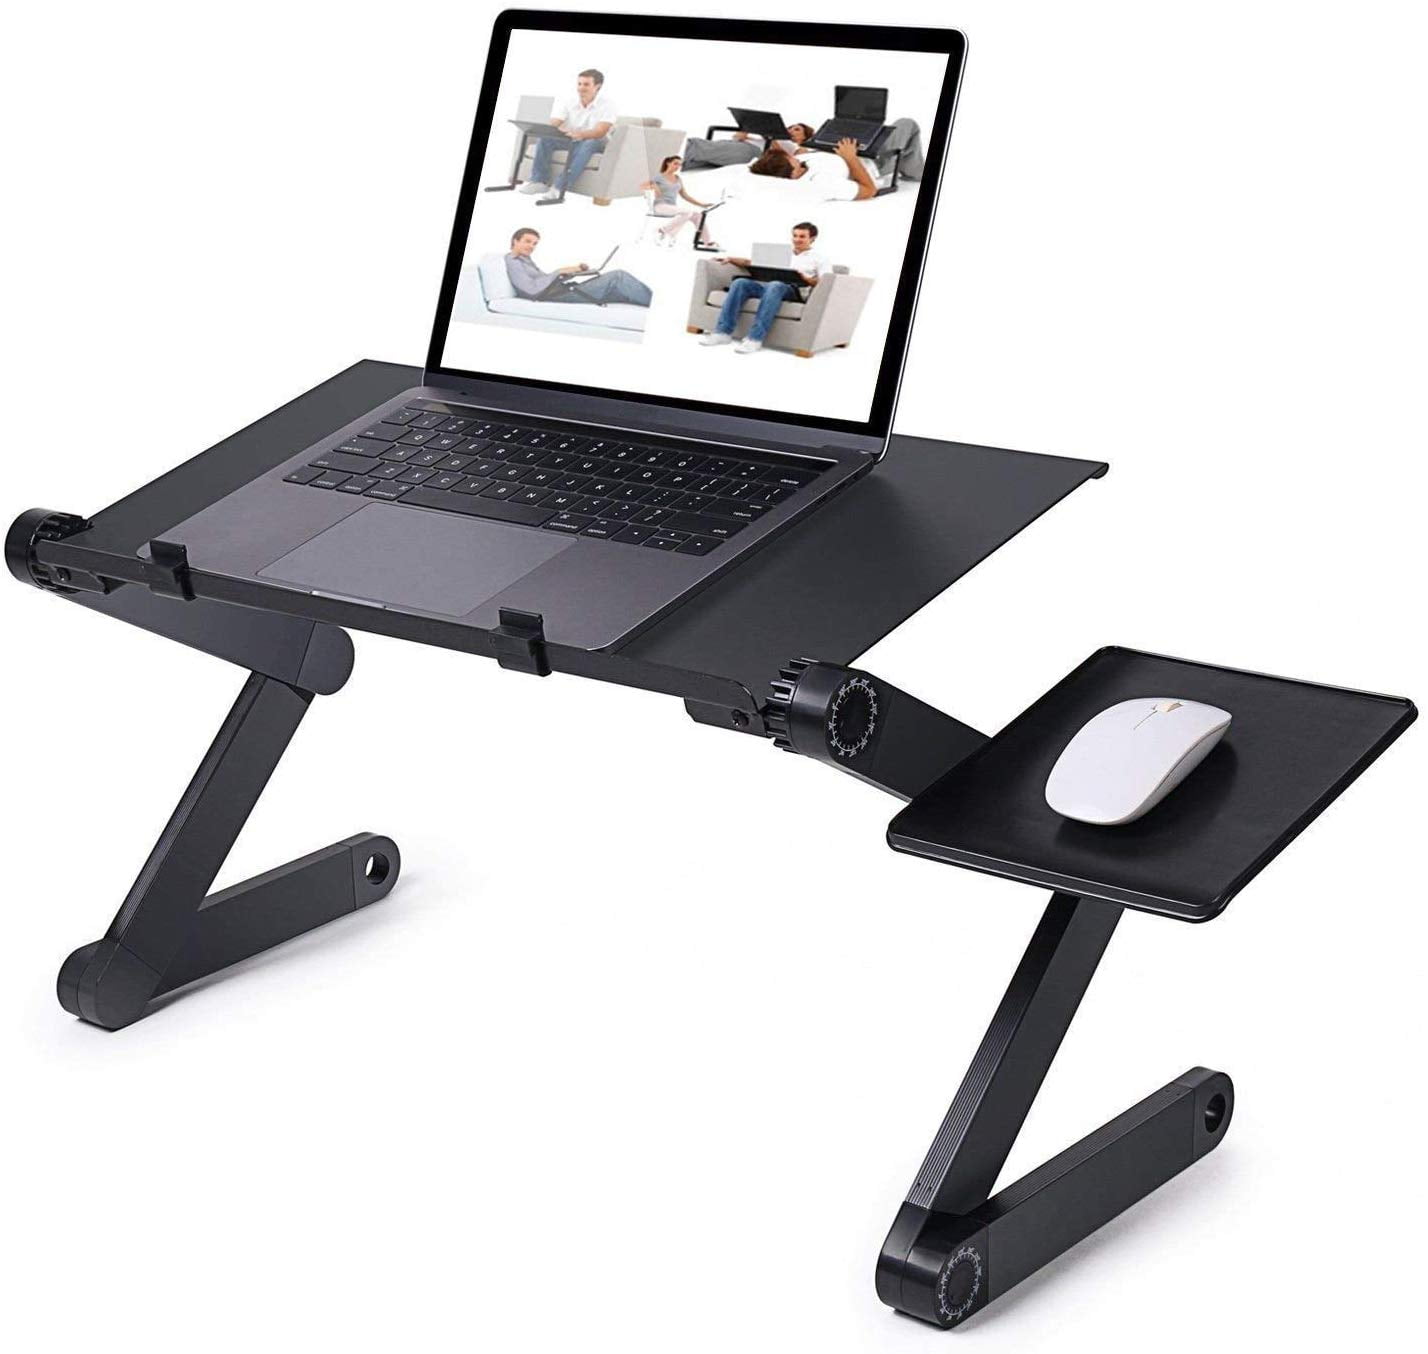 Portable Laptop Desk Fits Up to 15.6 Inch Laptops Drawing Table Lap Writing Board for Sofa & Bed LORYERGO Lap Desk 6 Adjustable Angles Laptop Stand with Detachable Mouse Pad & Dual Cushions 